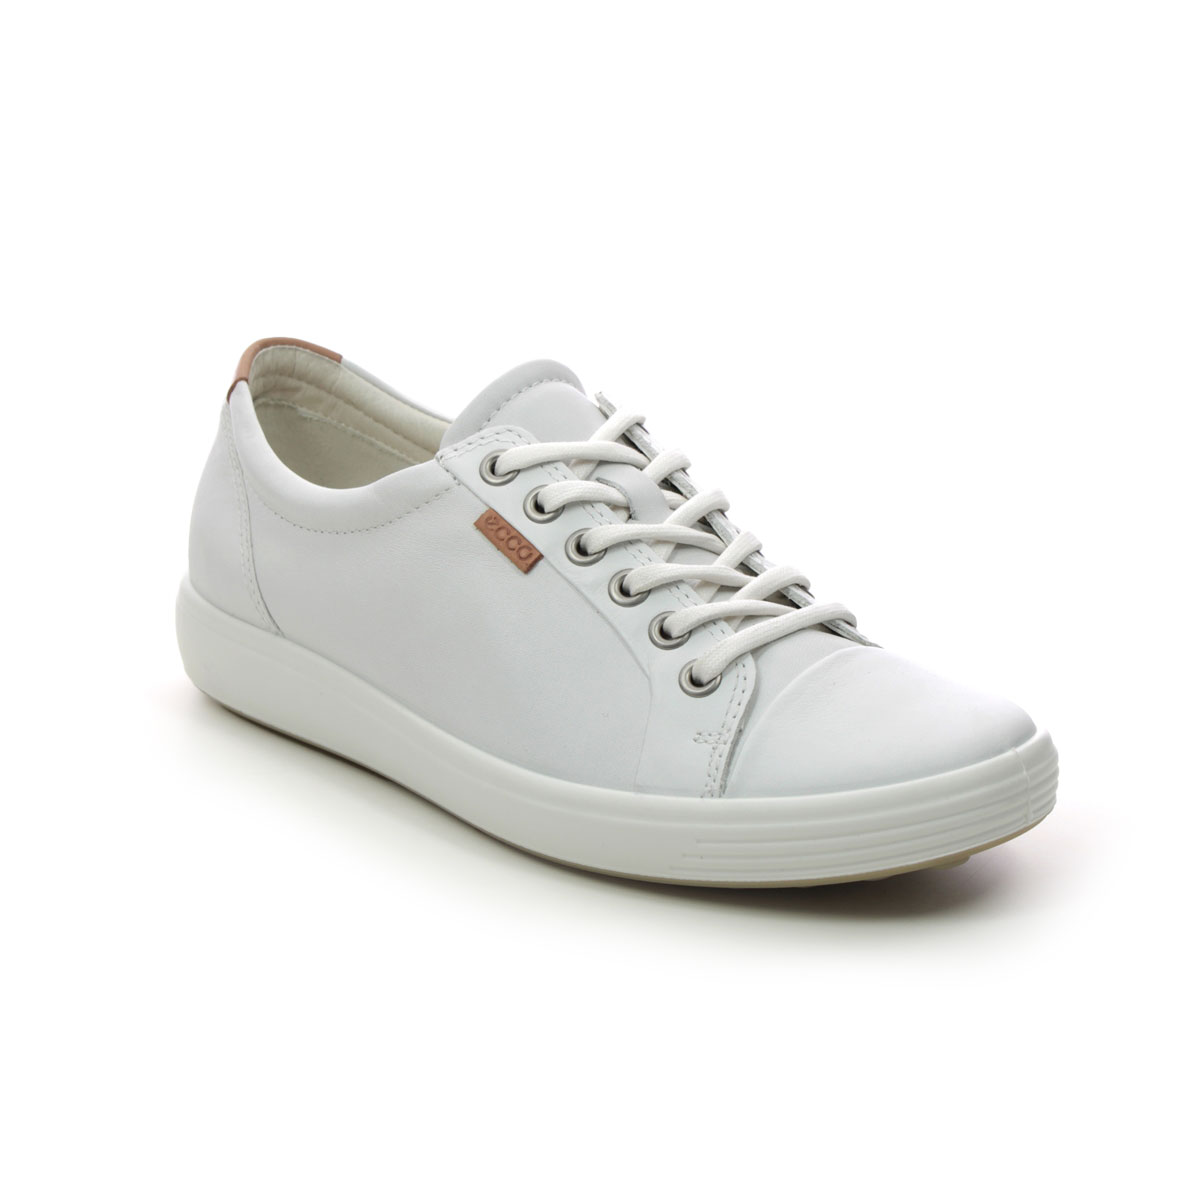 Ecco Soft 7 Lace White Leather Womens Trainers 430003-01007 In Size 40 In Plain White Leather